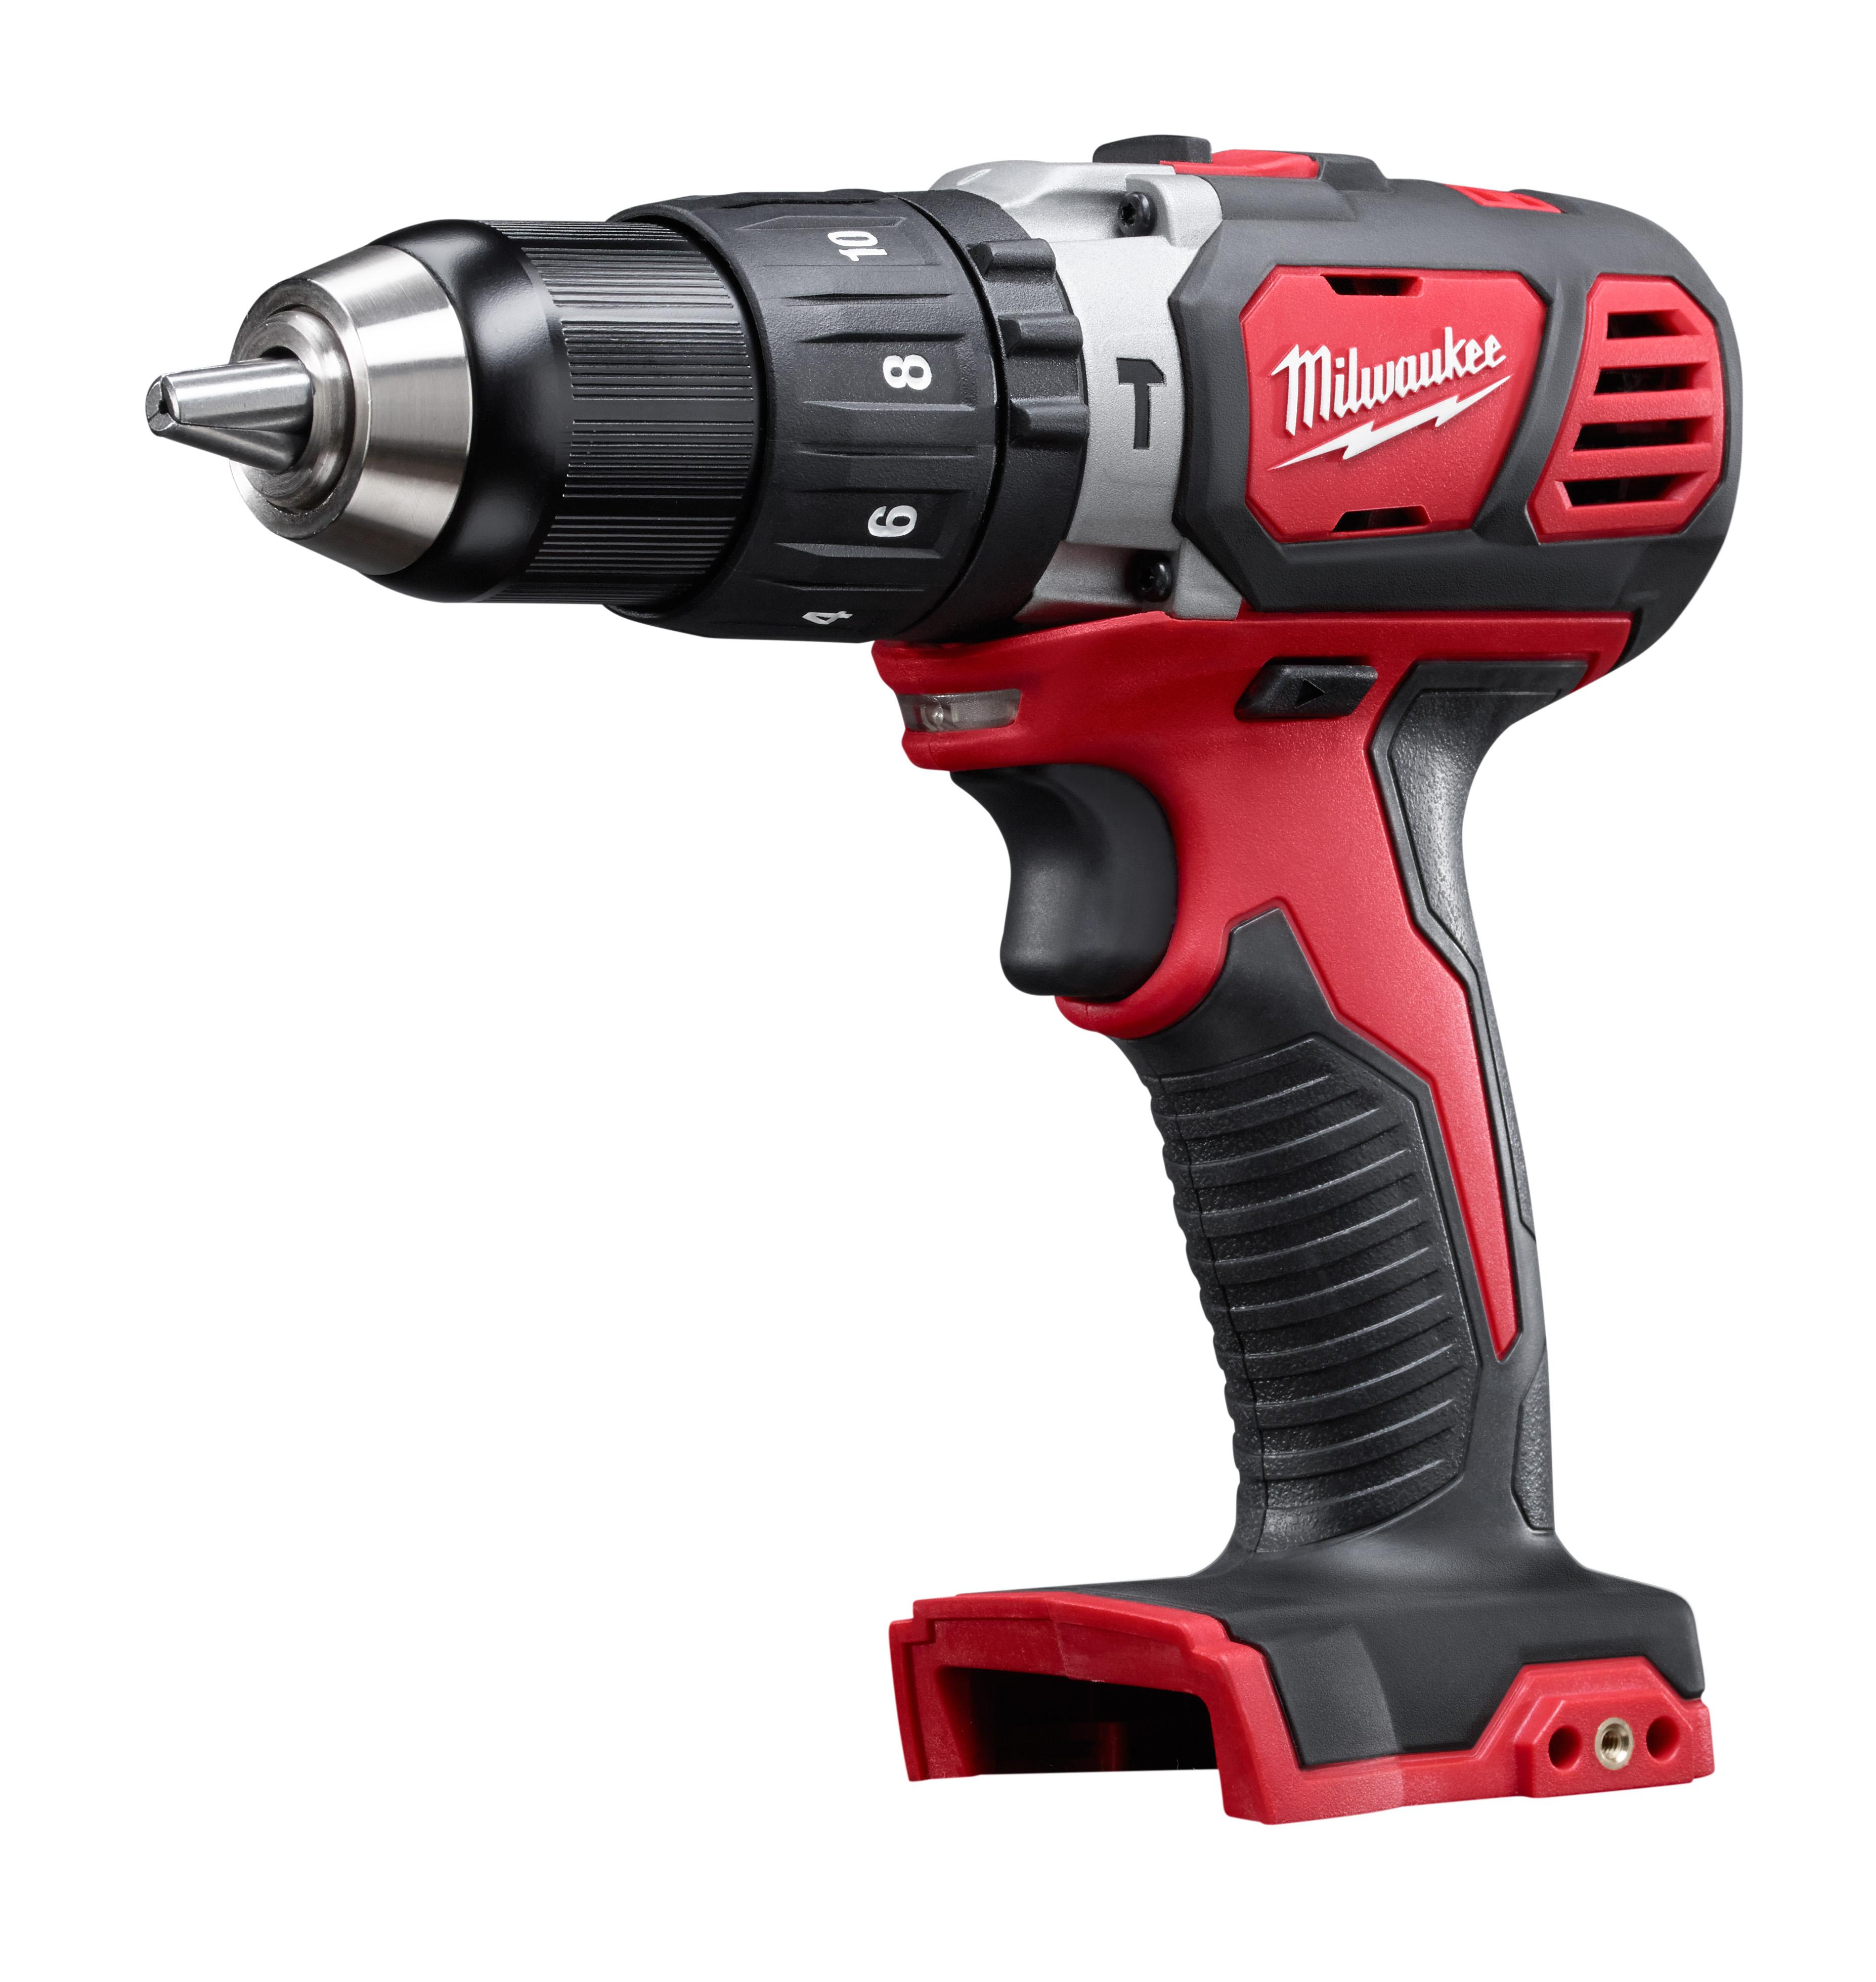 Milwaukee® M18™ 2606-22CT Cordless Drill/Driver Kit, 1/2 in Chuck, 18 VDC, 0 to 400/0 to 1800 rpm No-Load, 7-1/4 in OAL, Lithium-Ion Battery